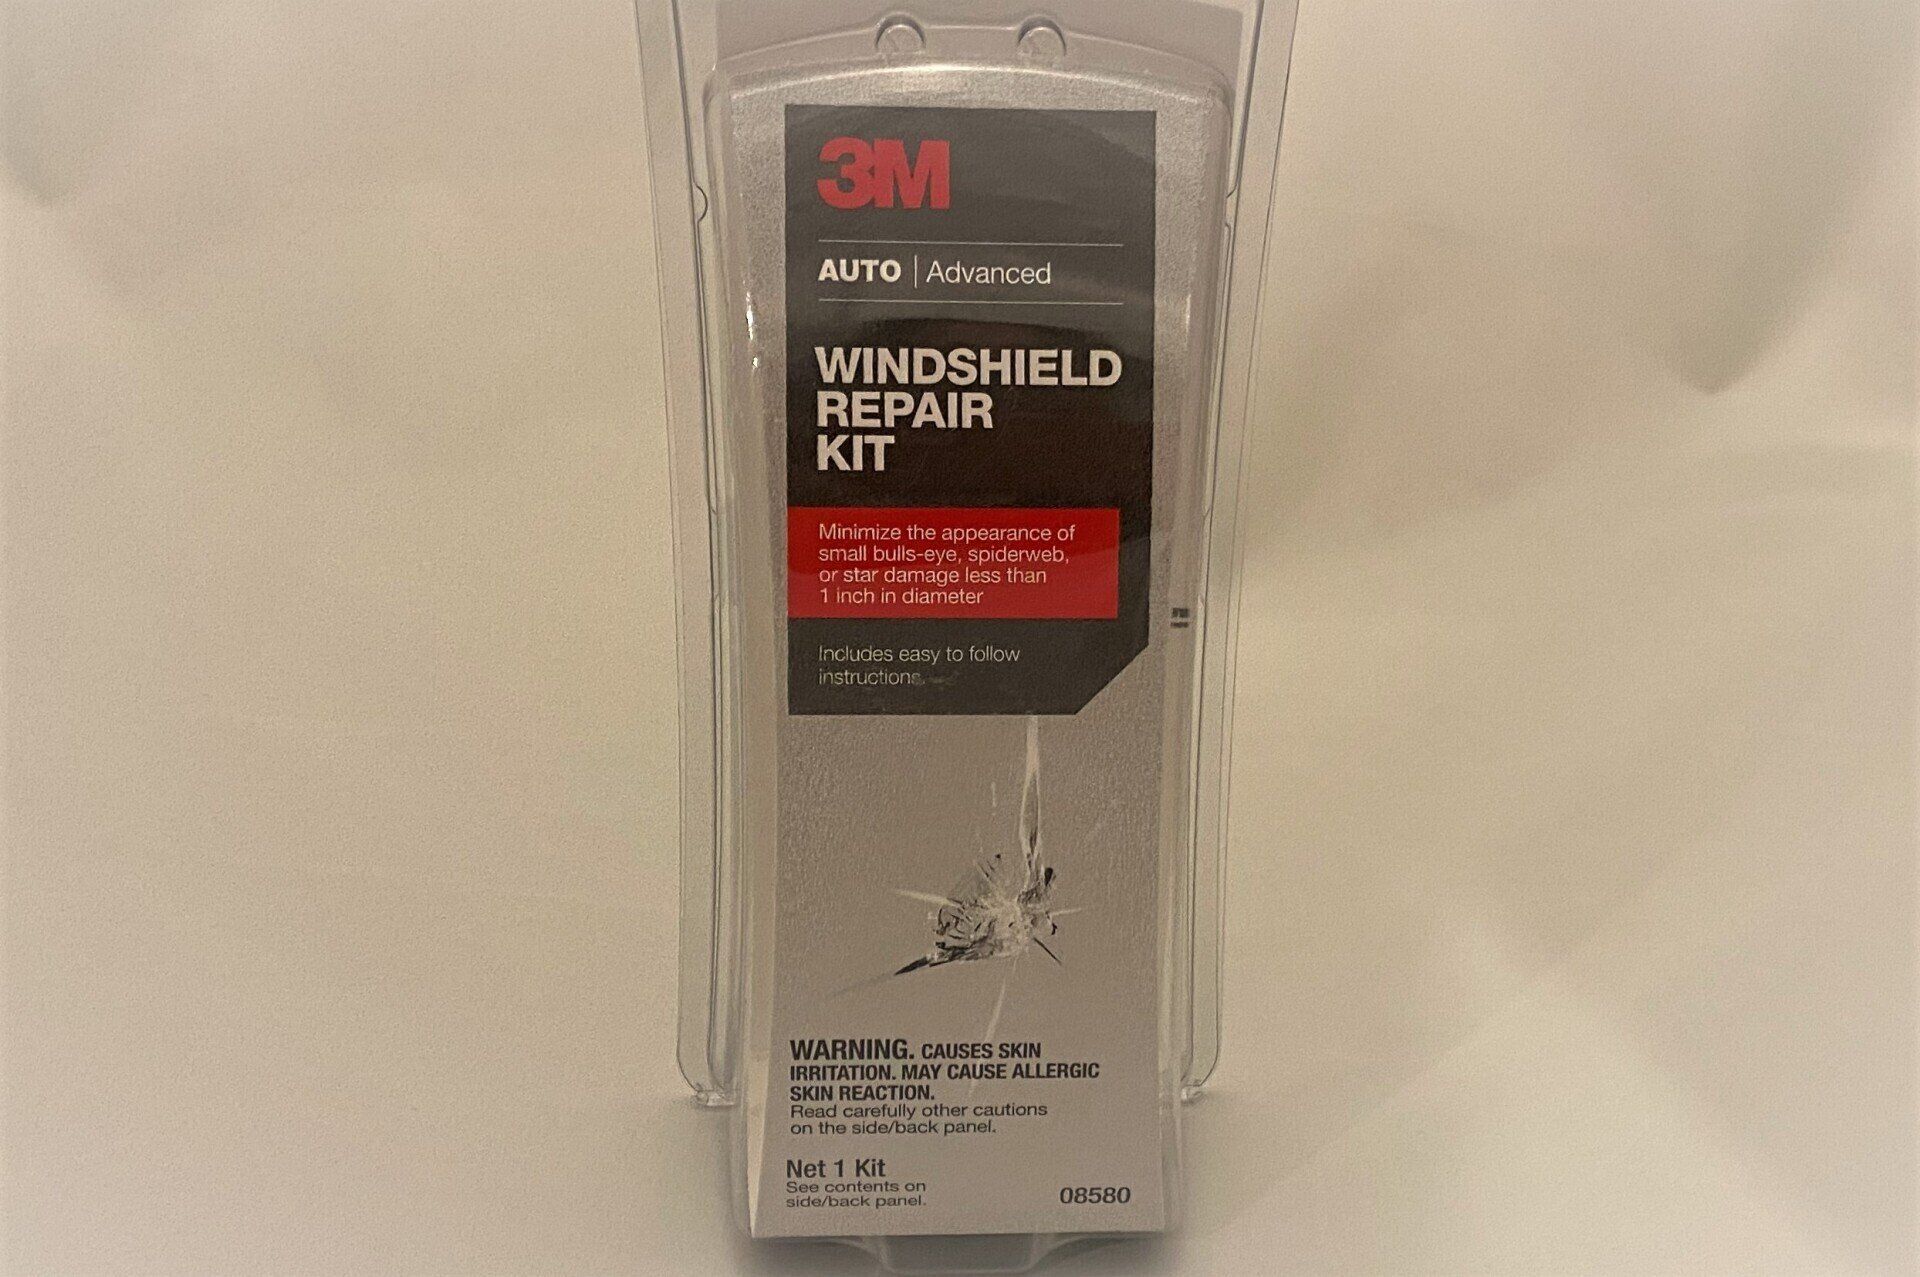 Windshield Repair Kits test scores by the ANSI Standard